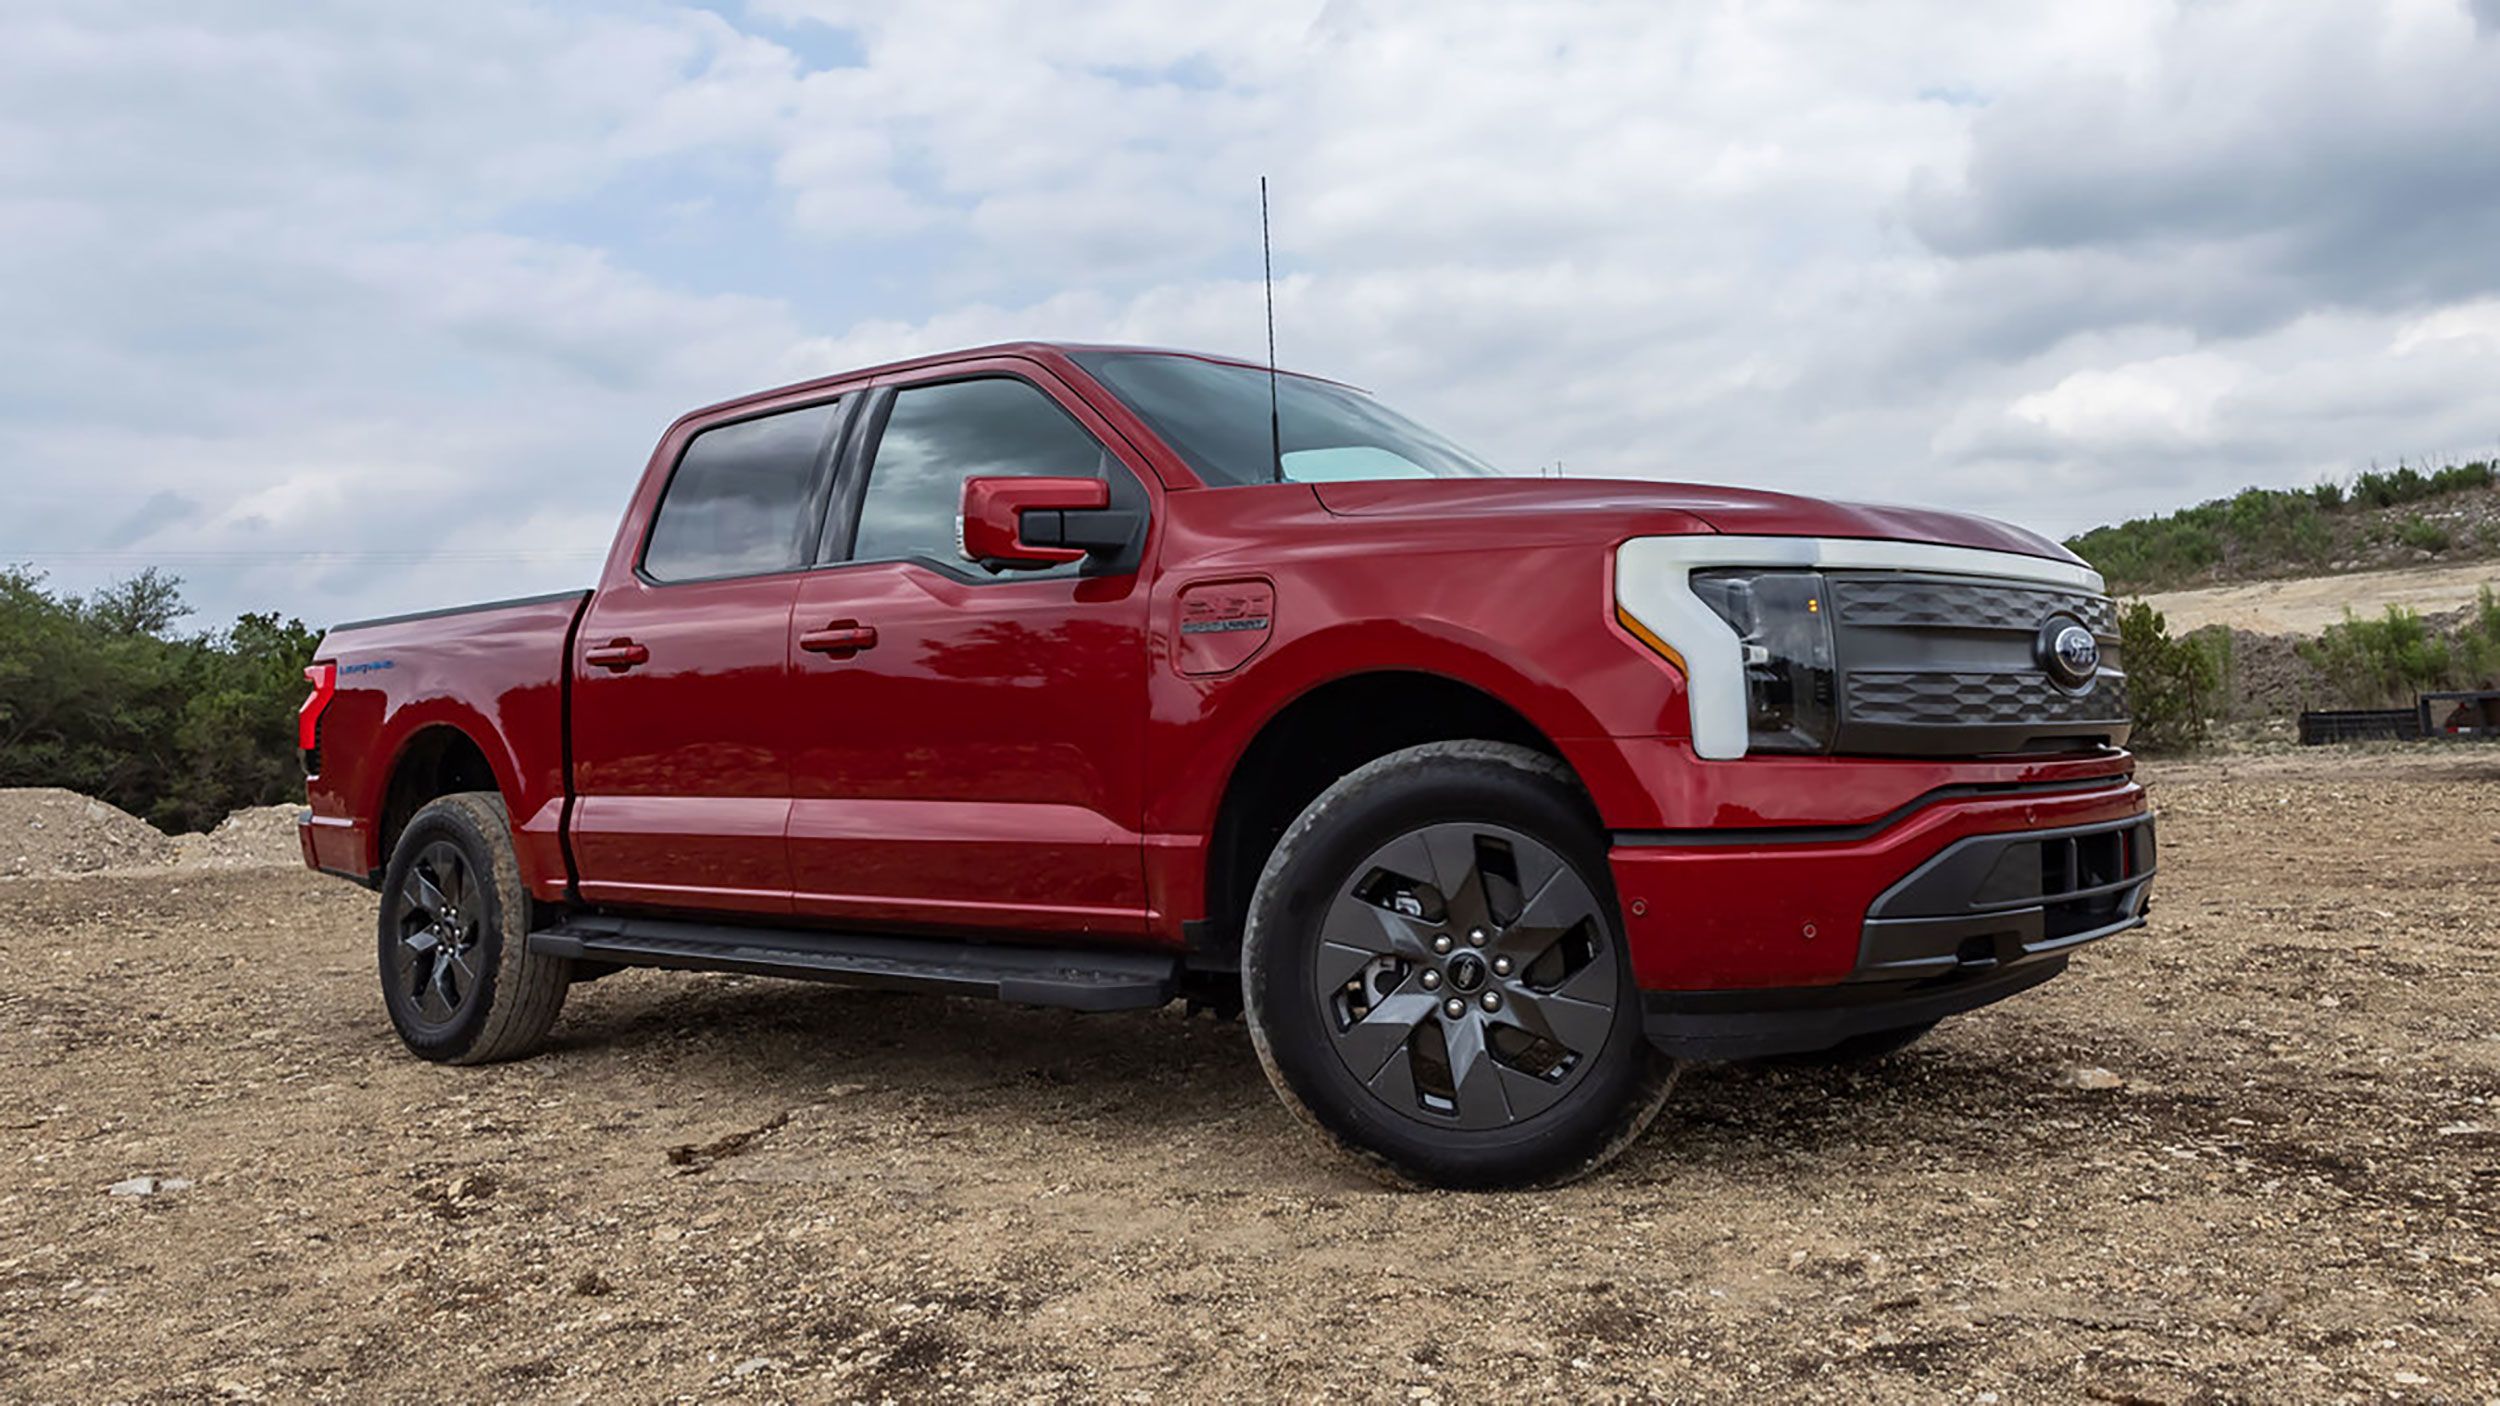 Ford's electric F-150 Lightning is a better version of America's